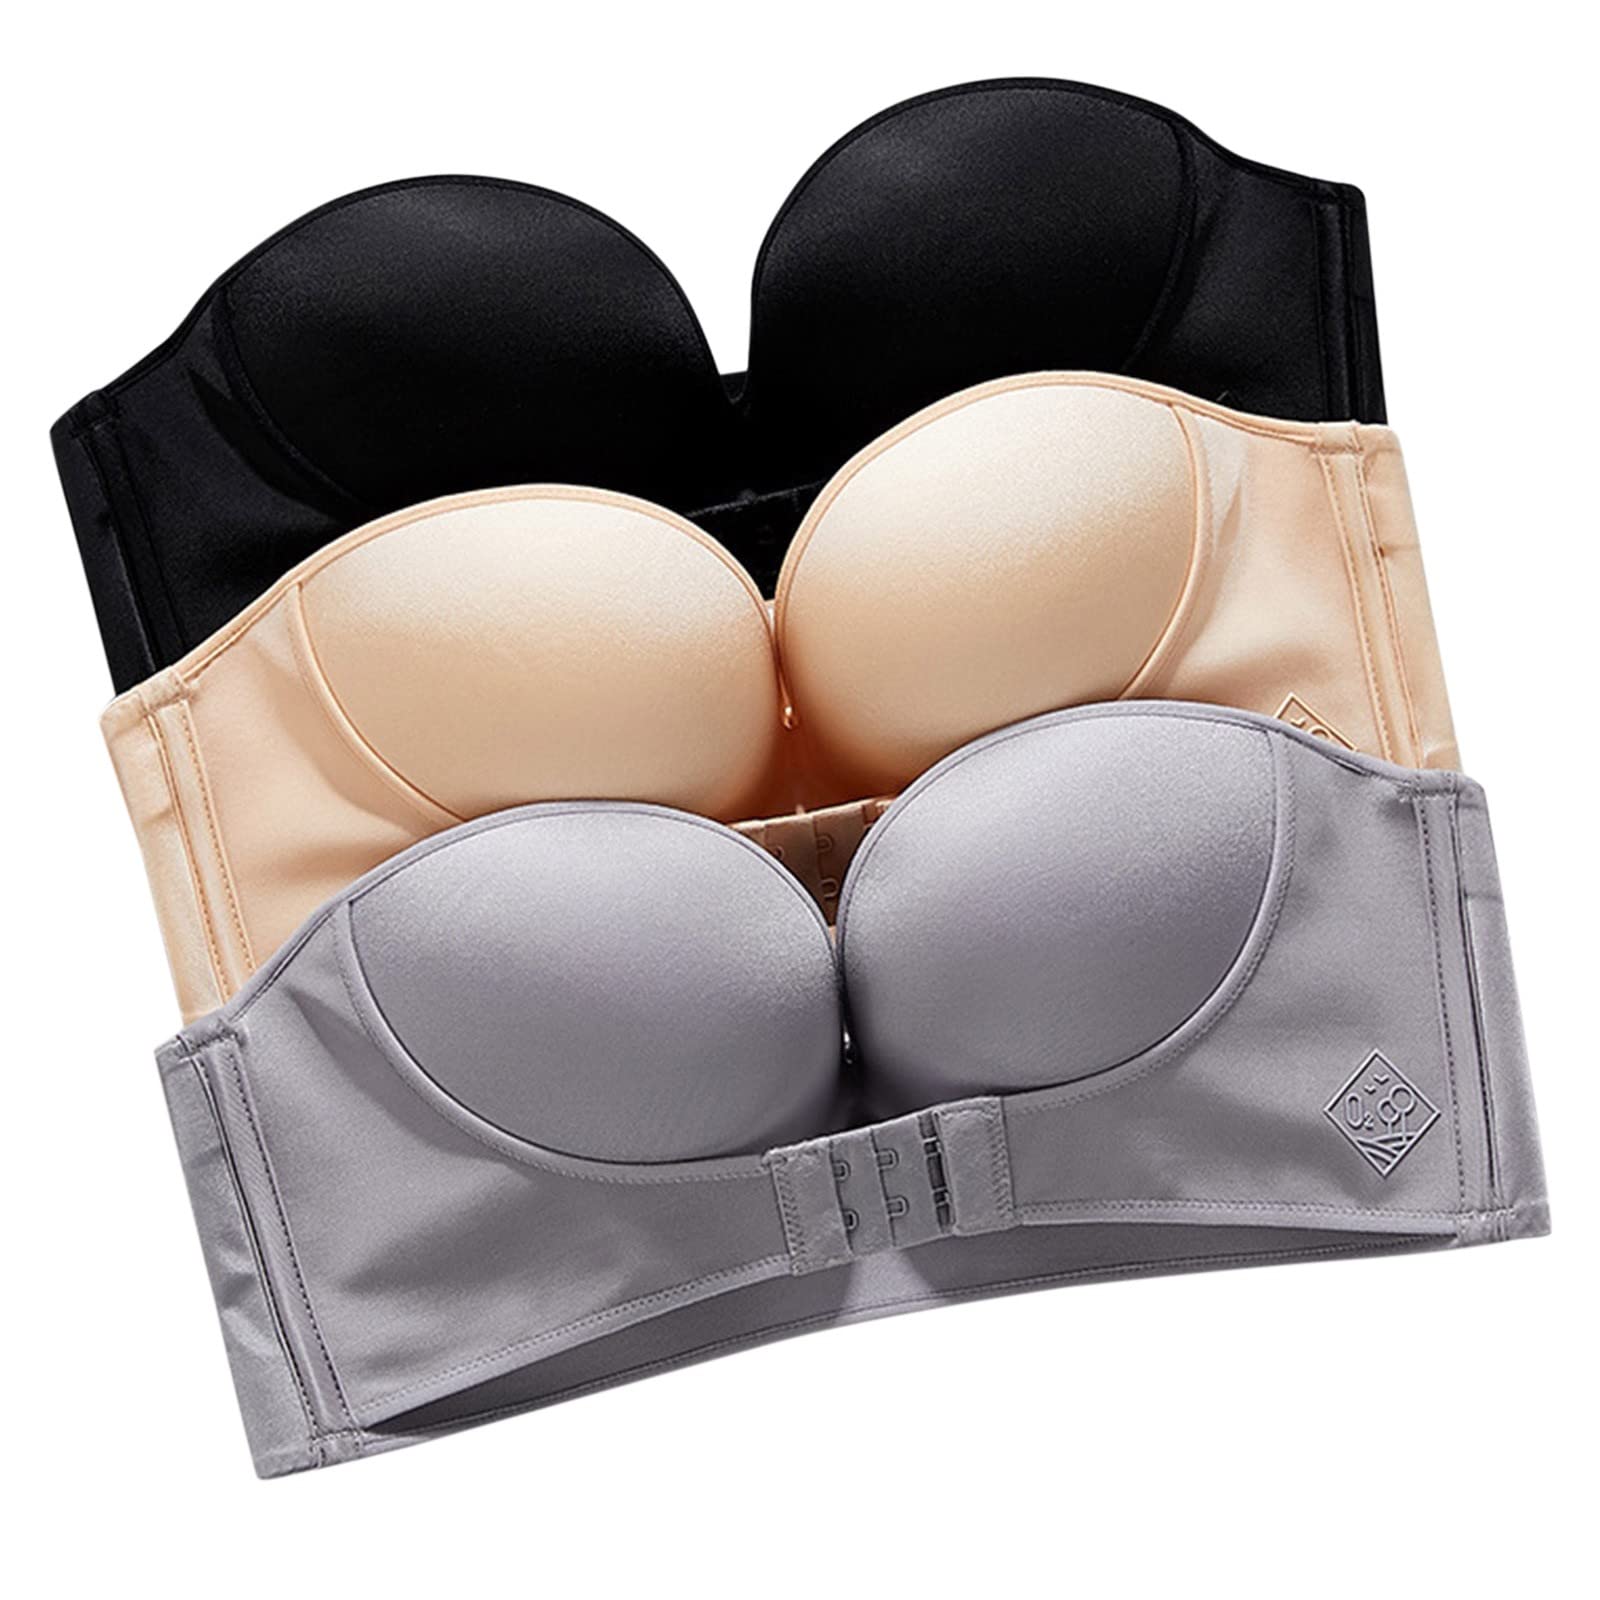 BETTYBRA®Invisible Strapless Super Push Up Bra (BUY ONE GET TWO FREE)-BEIGE